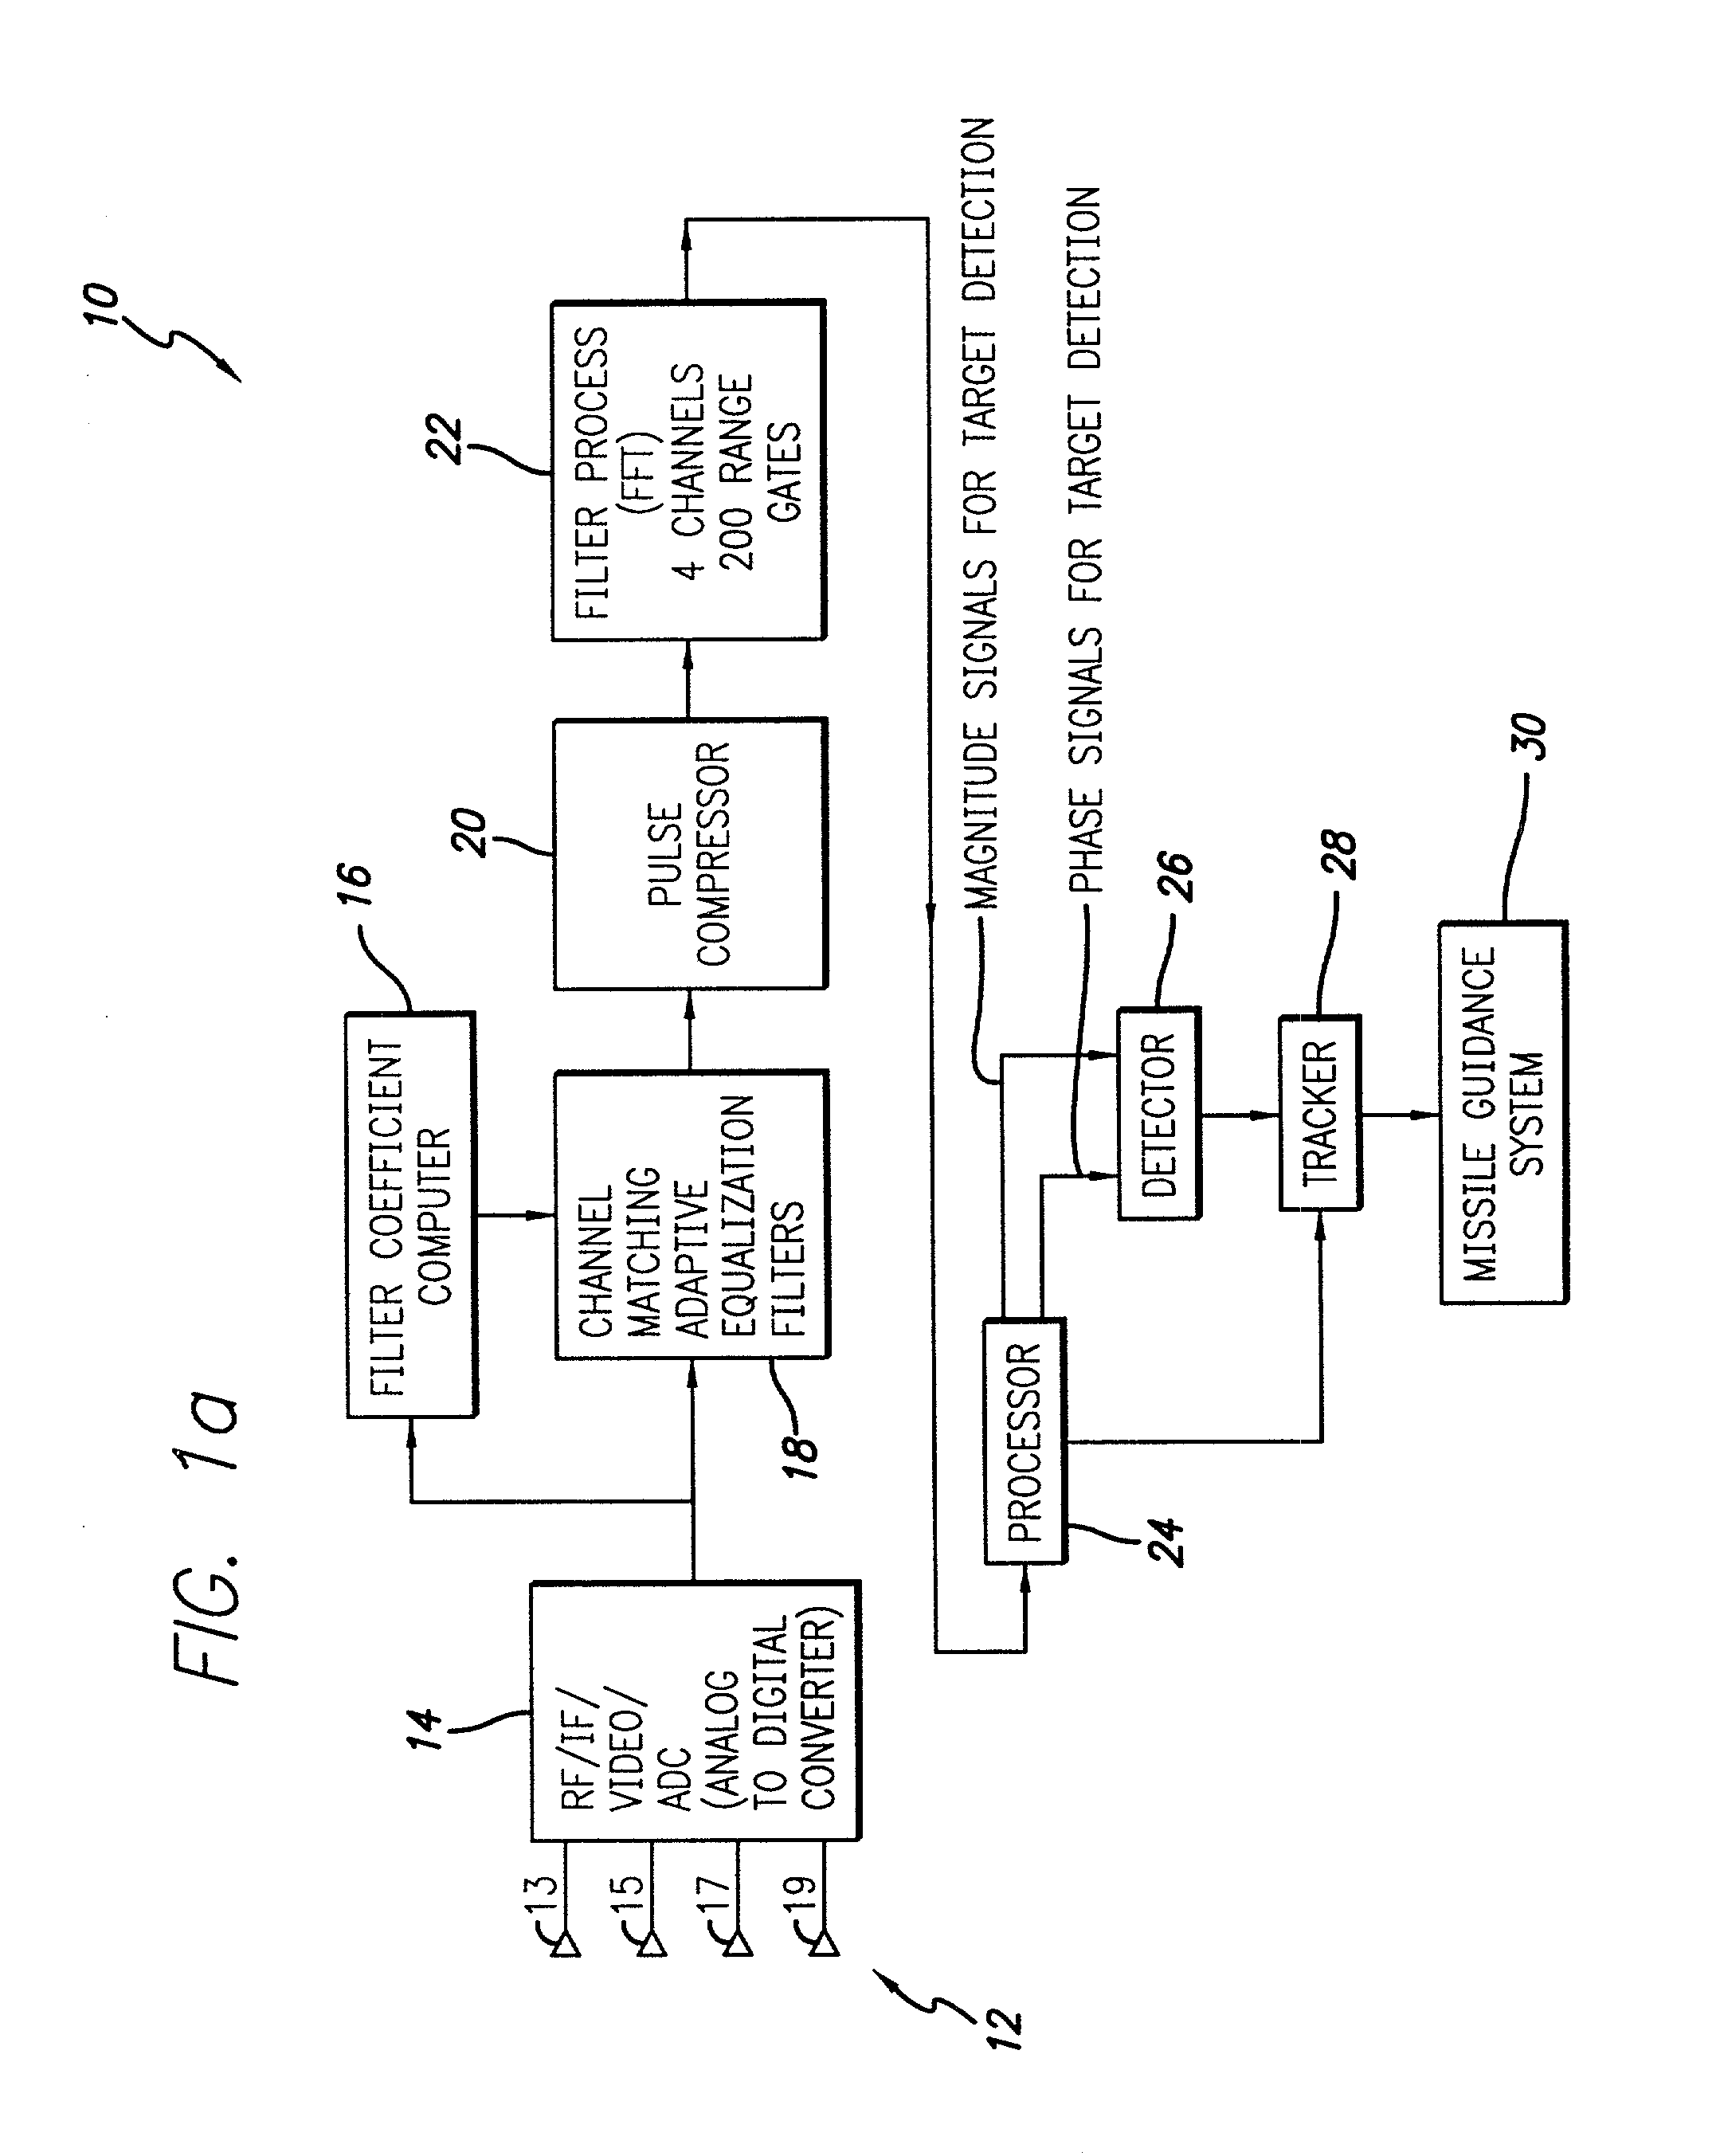 System and method for detecting and estimating the direction of near-stationary targets in monostatic clutter using phase information